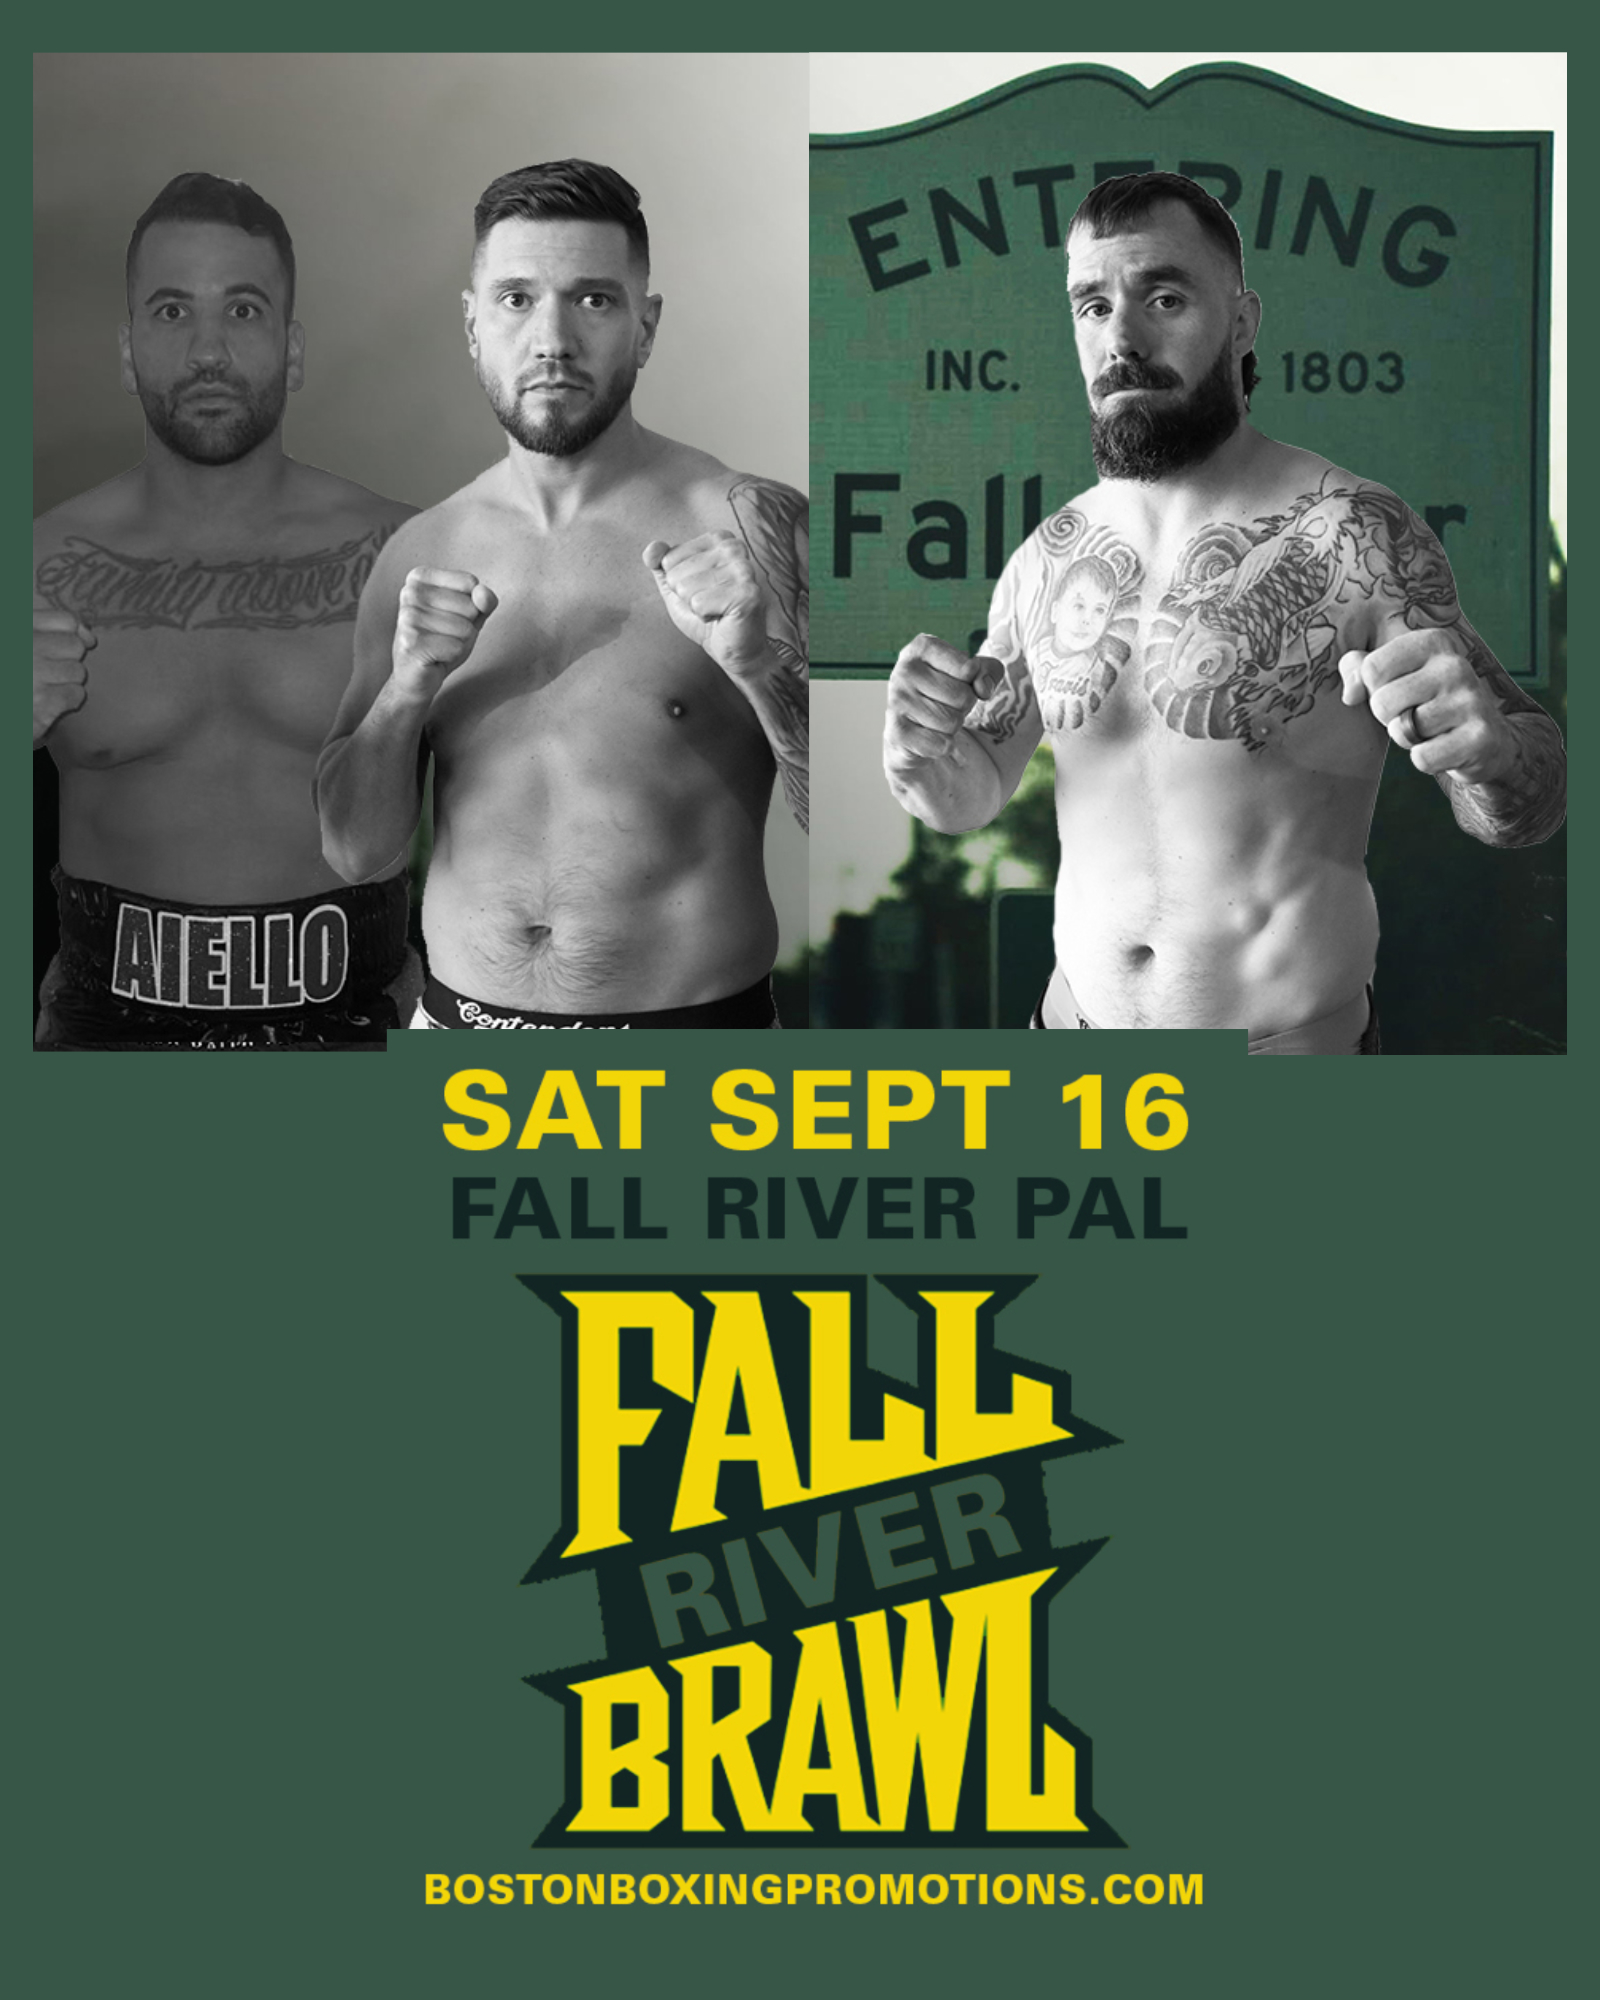 BBP Fall River Brawl Live on Combat Sports Now